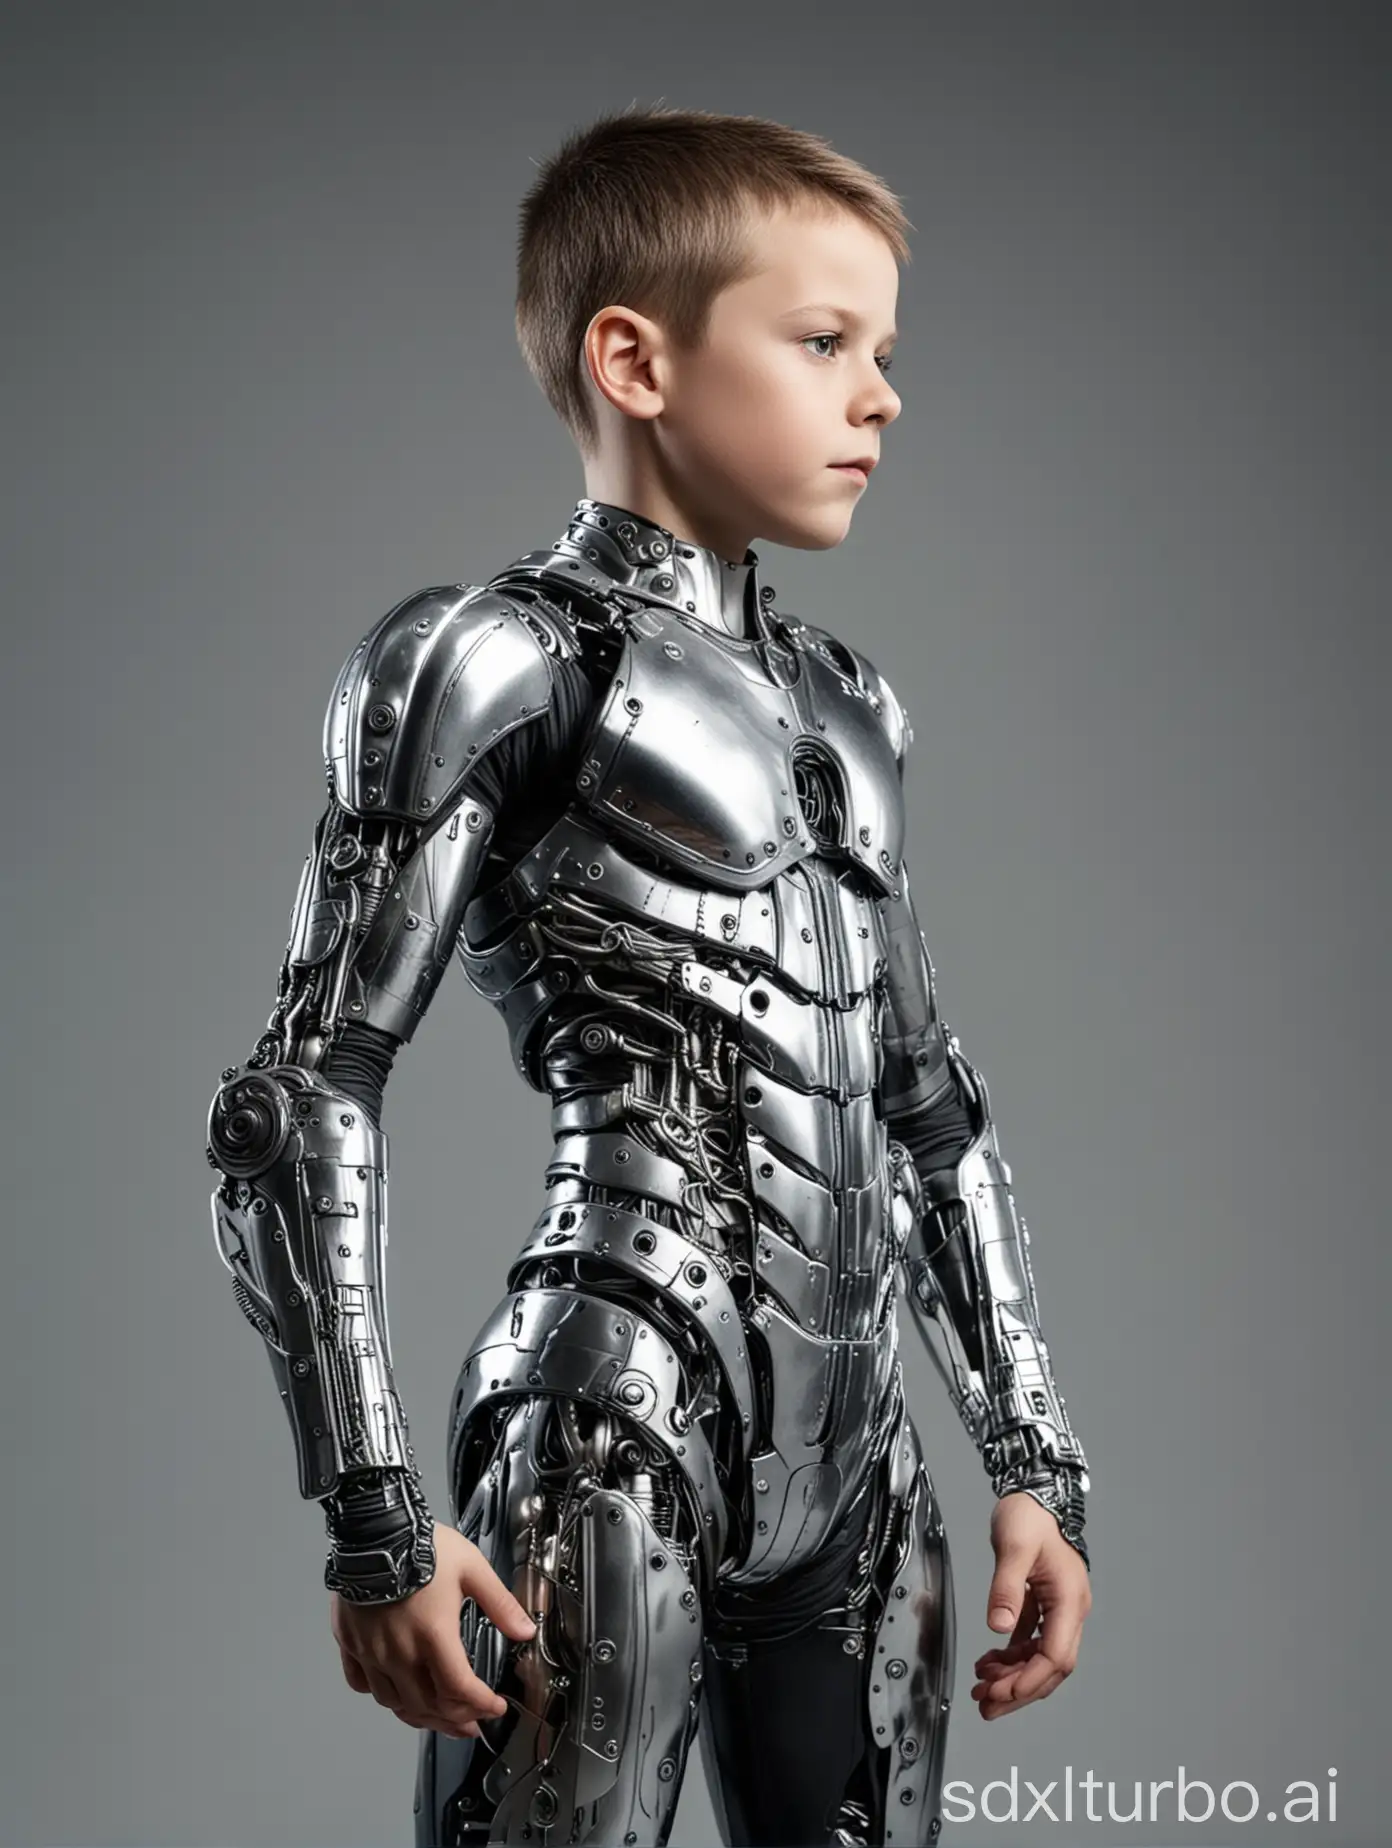 Muscular-Teen-in-Bionic-Metal-Suit-15YearOld-Athlete-Stands-Strong